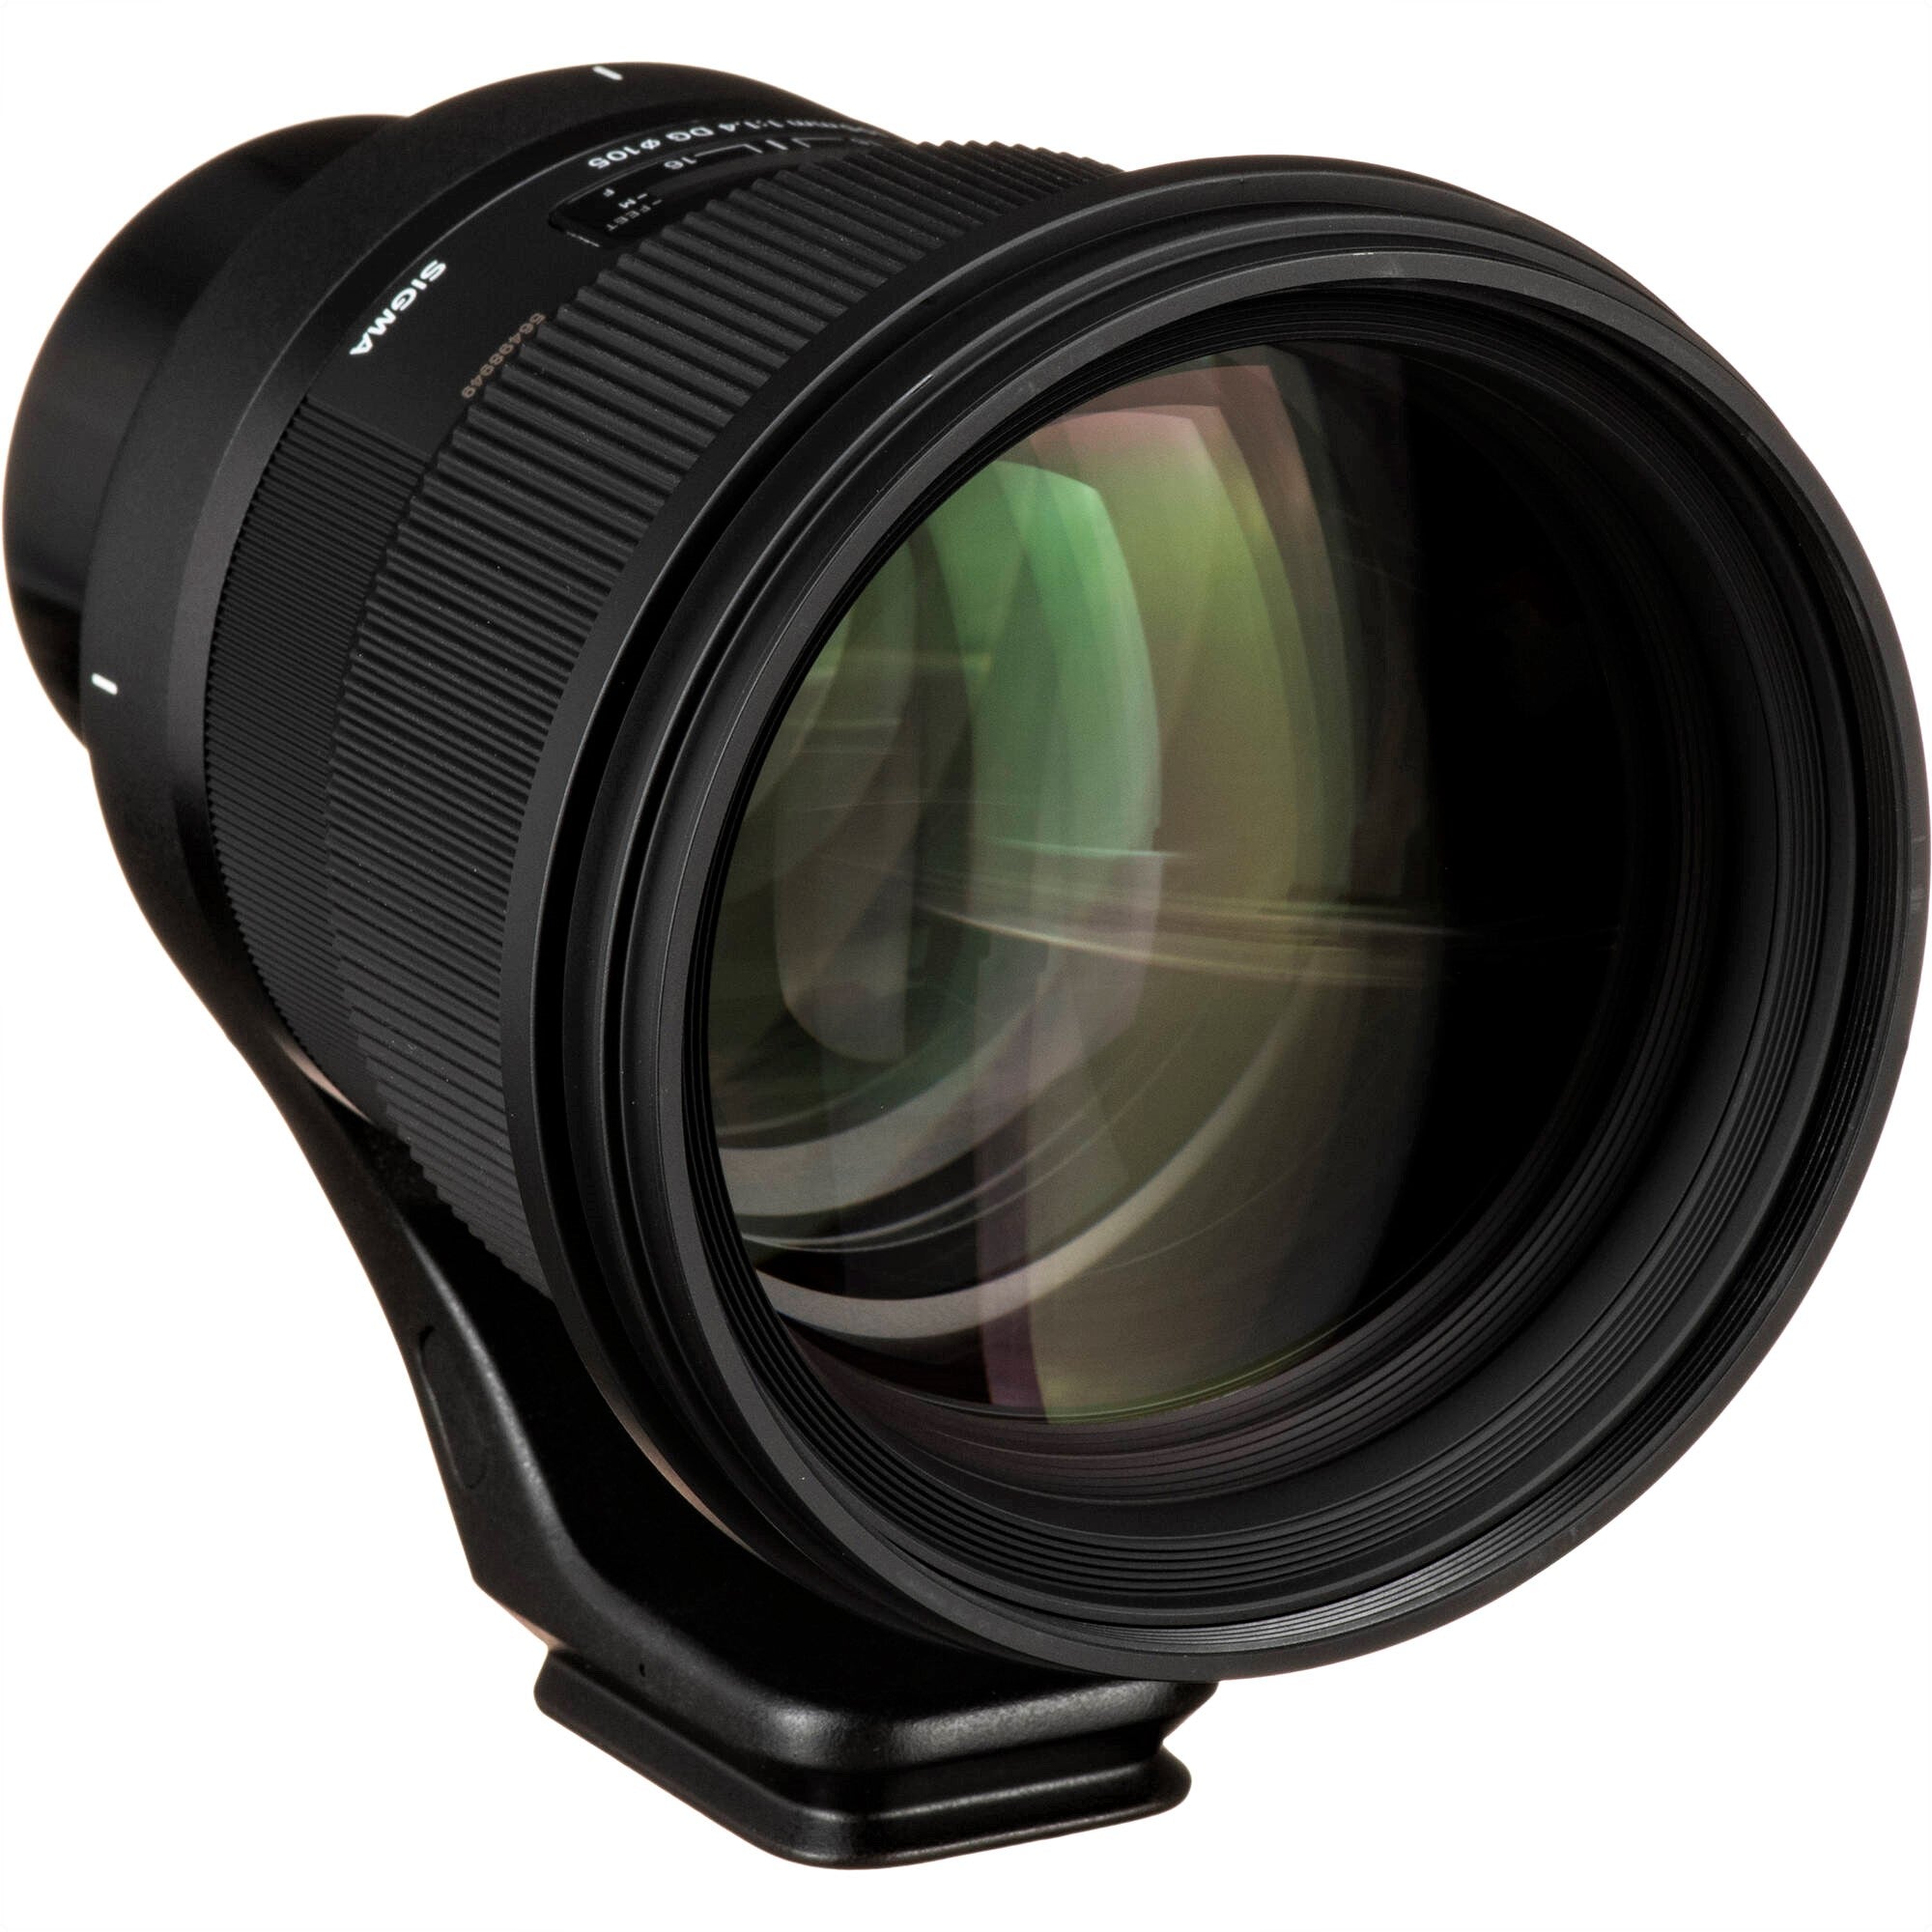 Sigma 105mm F1.4 DG HSM Art Lens for Sony E in a Front-Side View